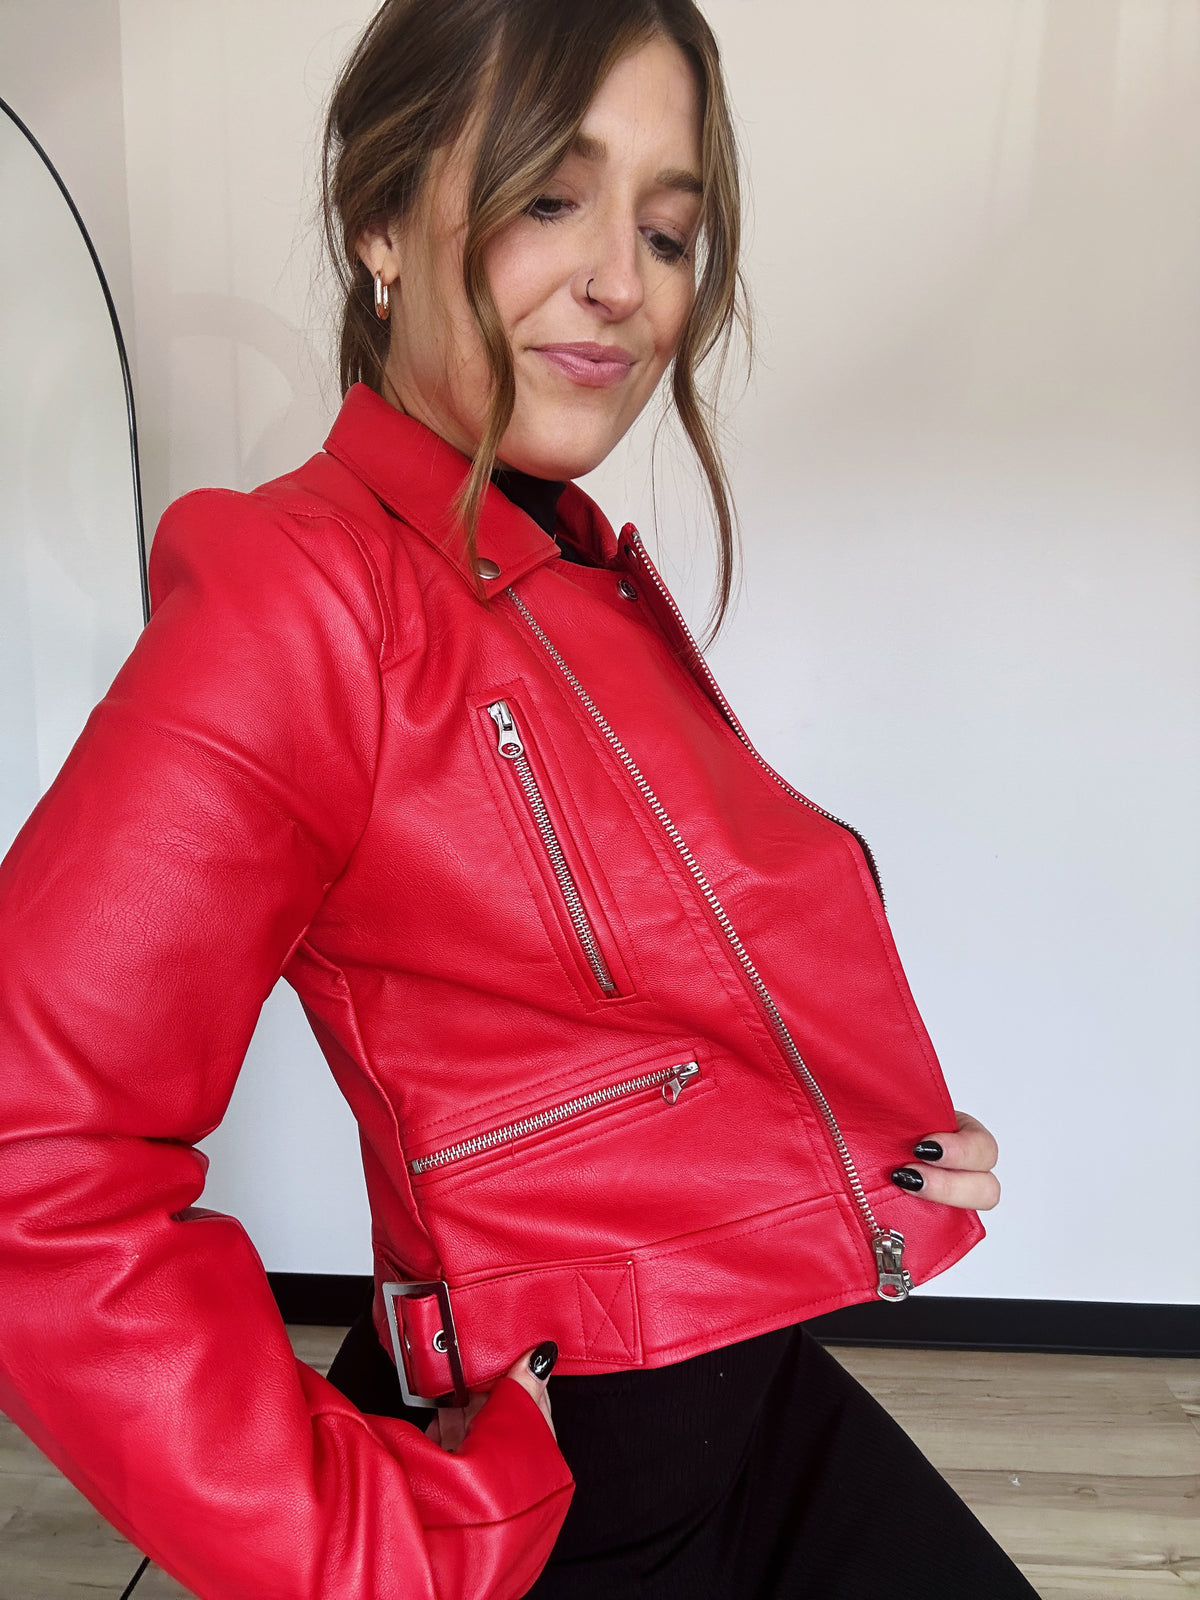 Cherry On Top Leather Jacket